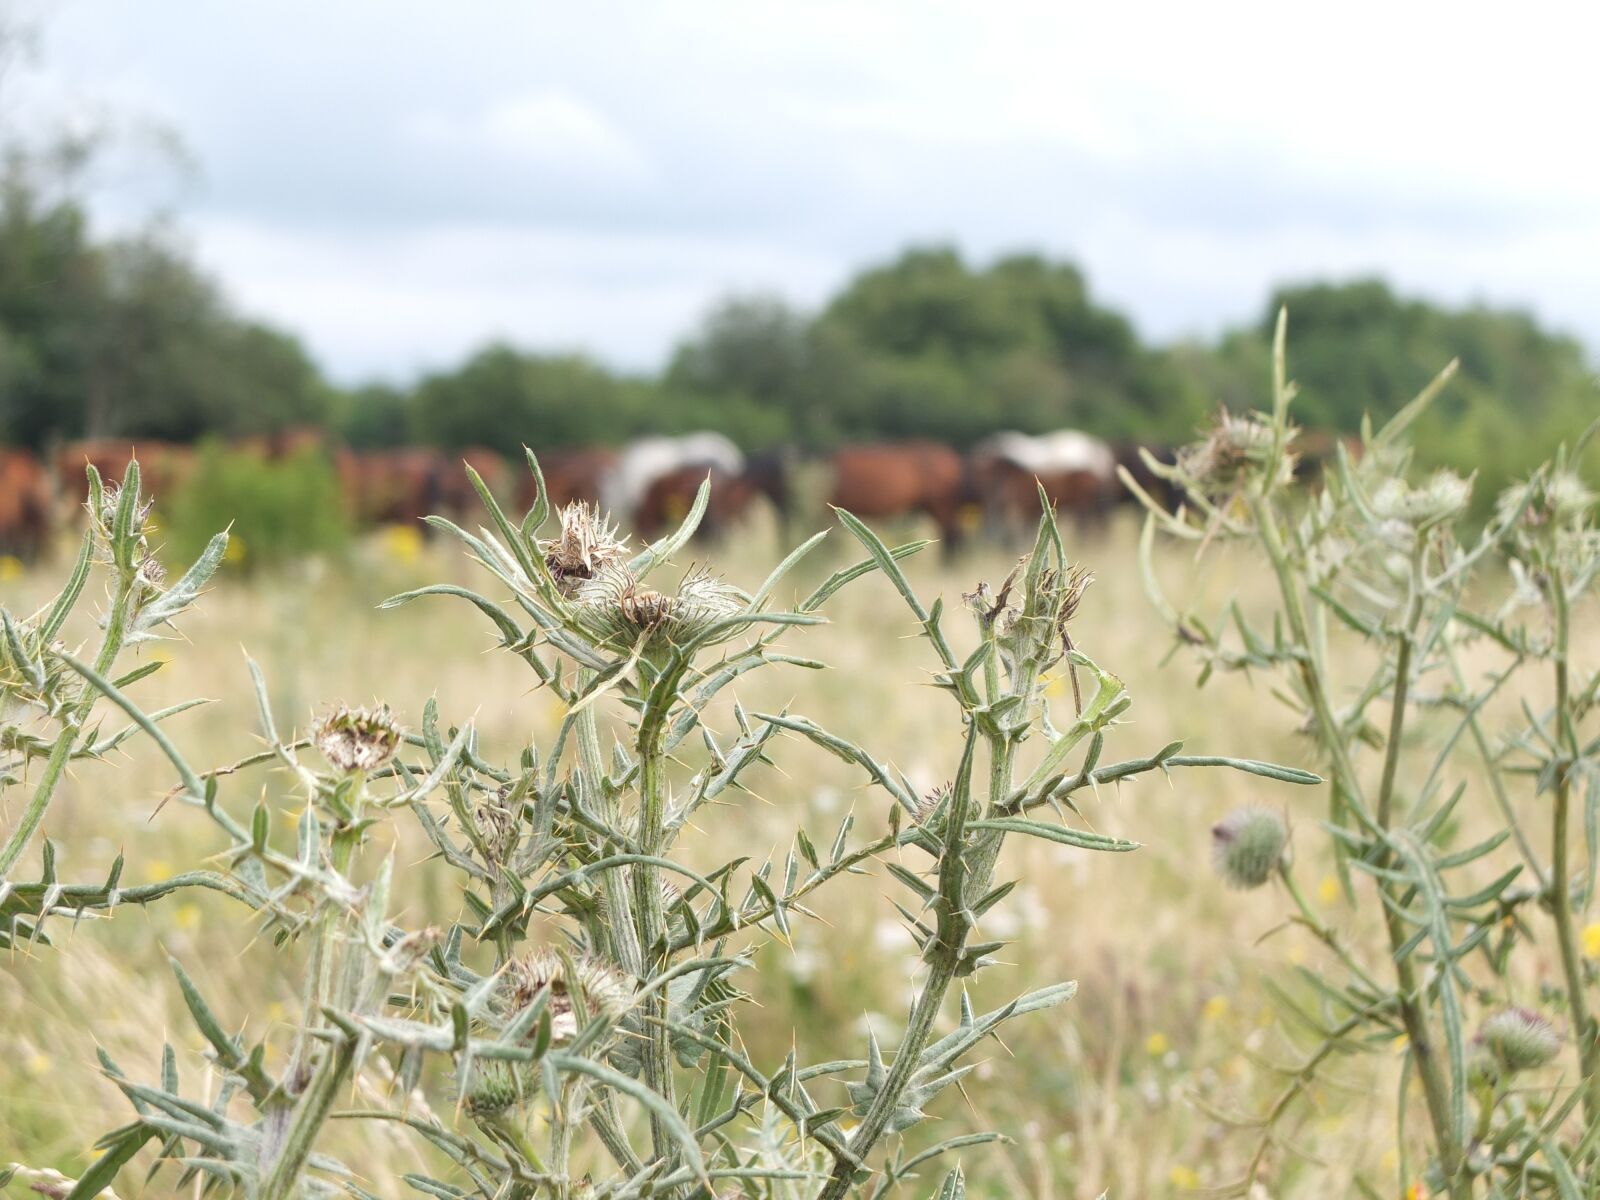 Fujifilm X10 sample photo. Thistles, thistle meadow, nature photography